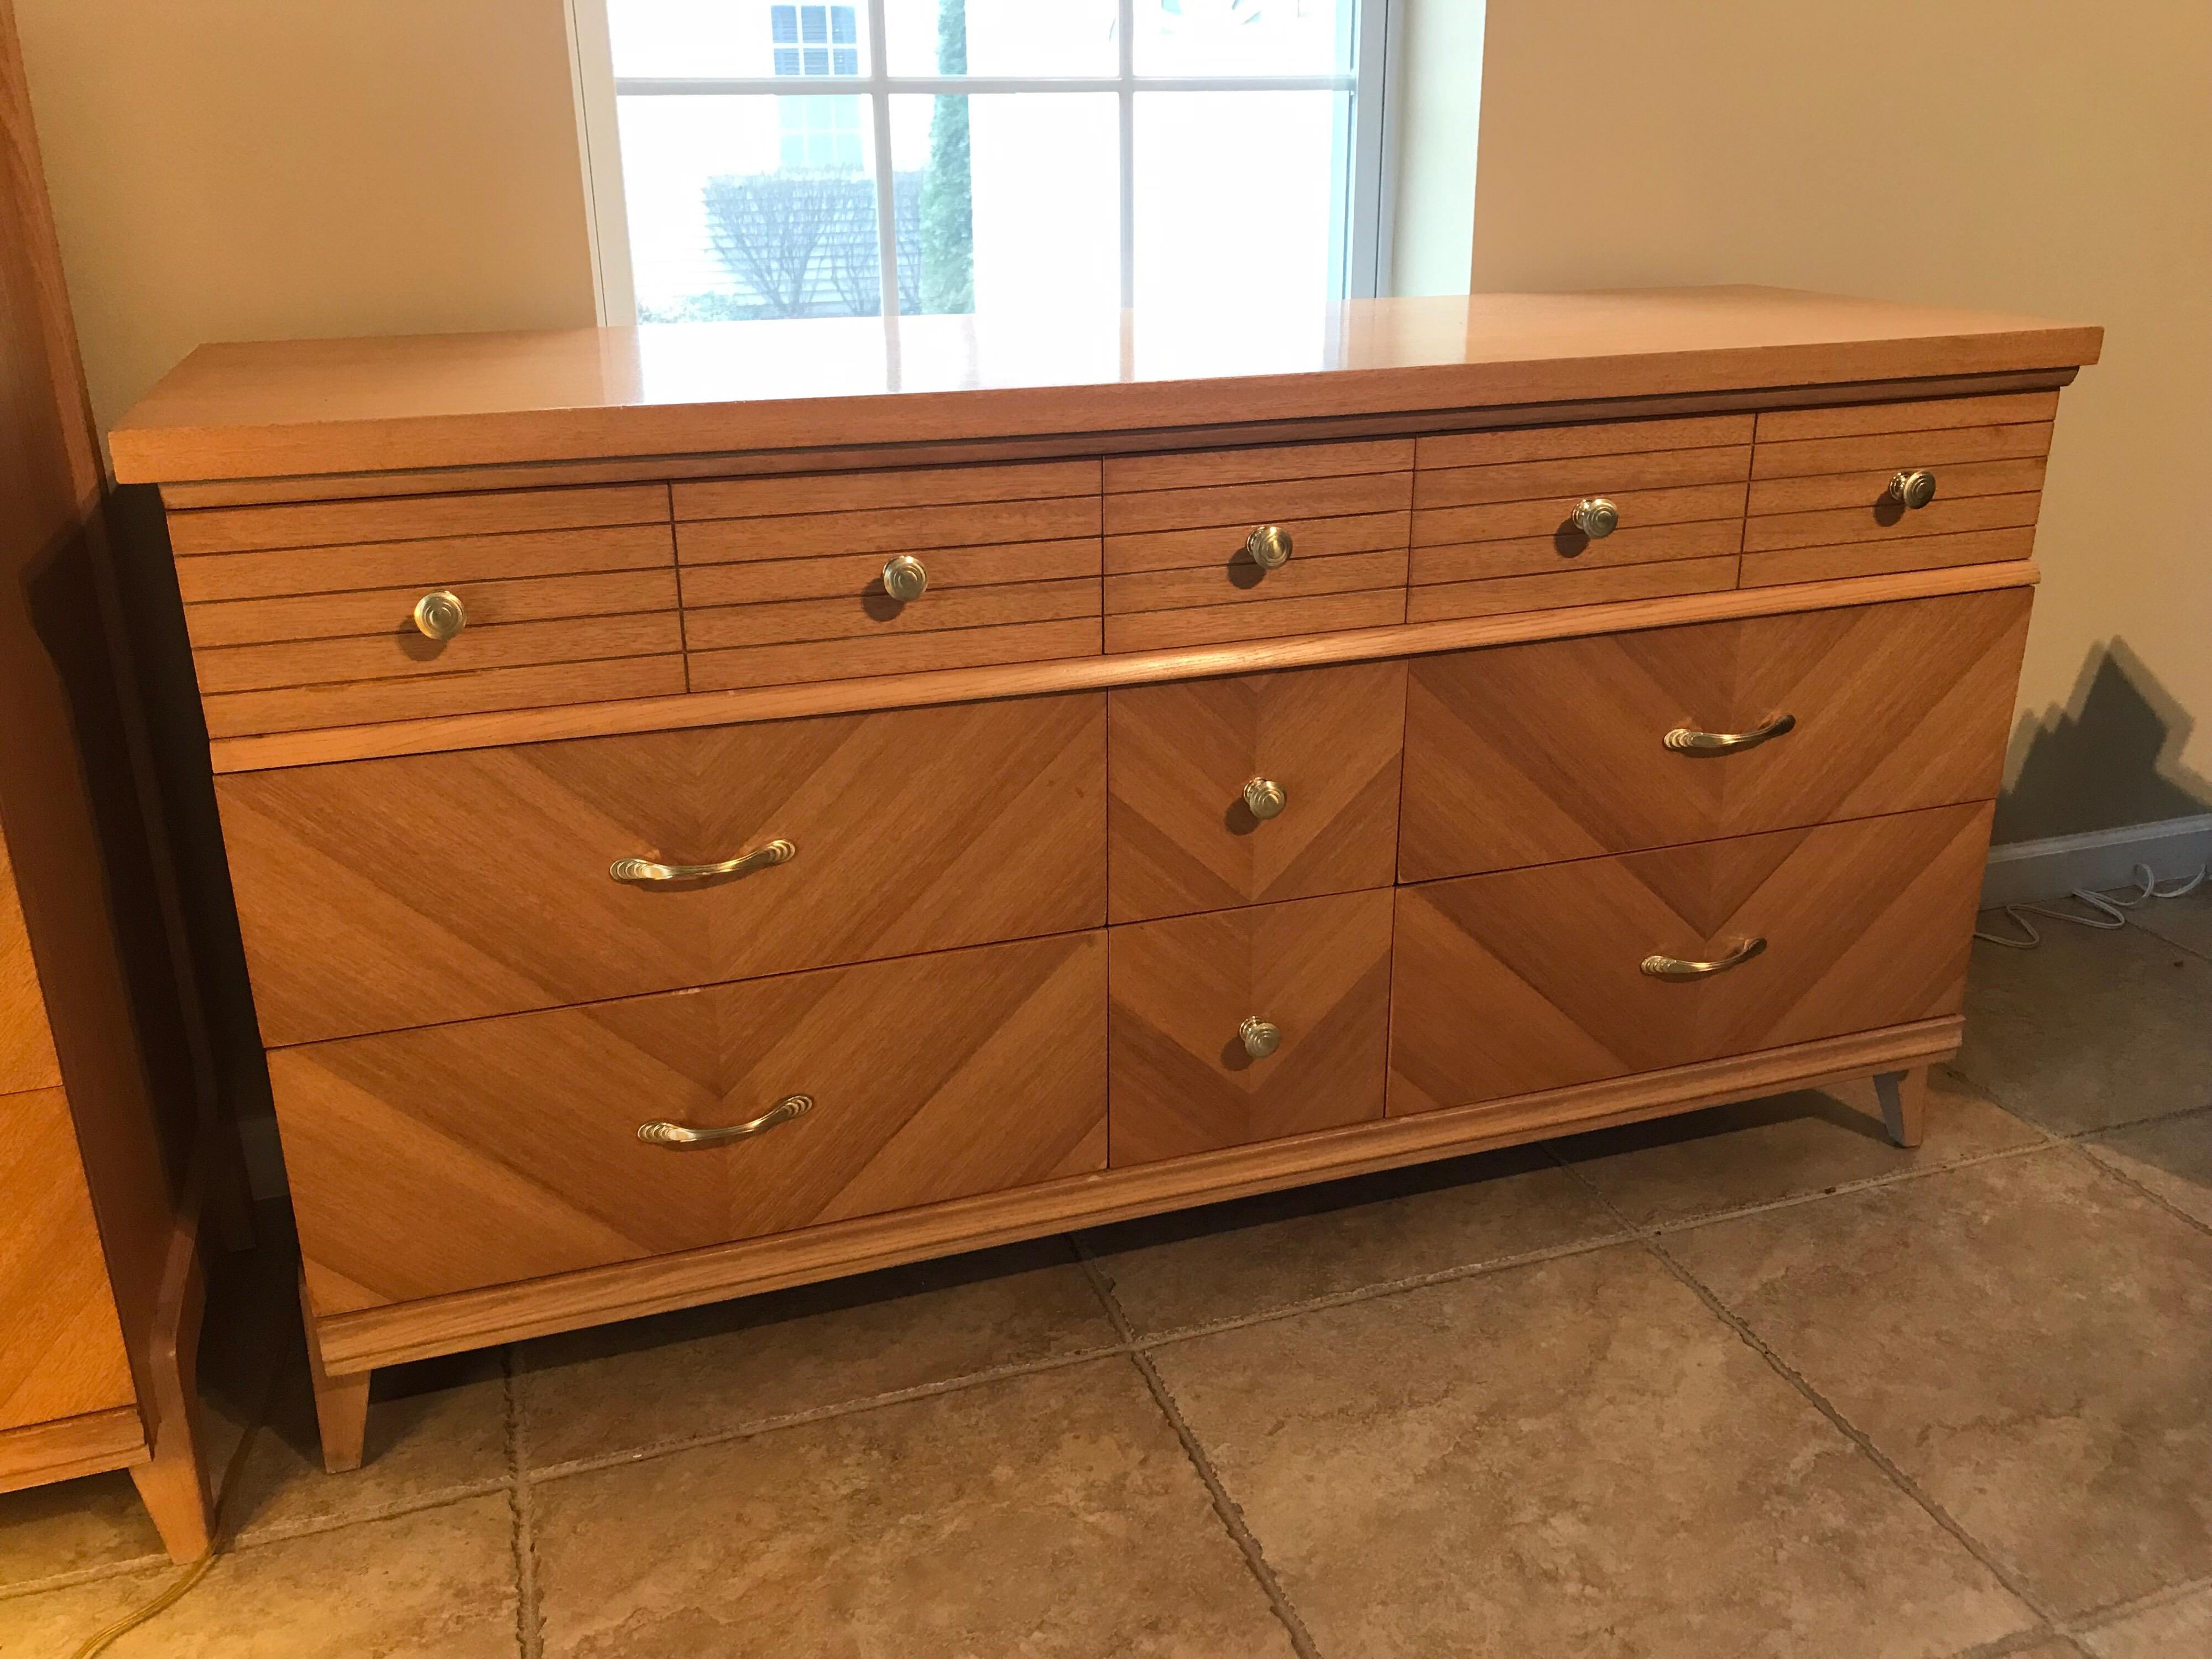 Pale bookmatched veneered double dresser, 1960s

Measures: 5’ wide x 18 3/4 deep x 32.25 “ high

Top drawer chairs:
Side drawers 23” wide 
Middle drawer 9” wide 
5” deep.

Middle and Bottom Drawers:
Side drawers 23” wide 
Middle drawers